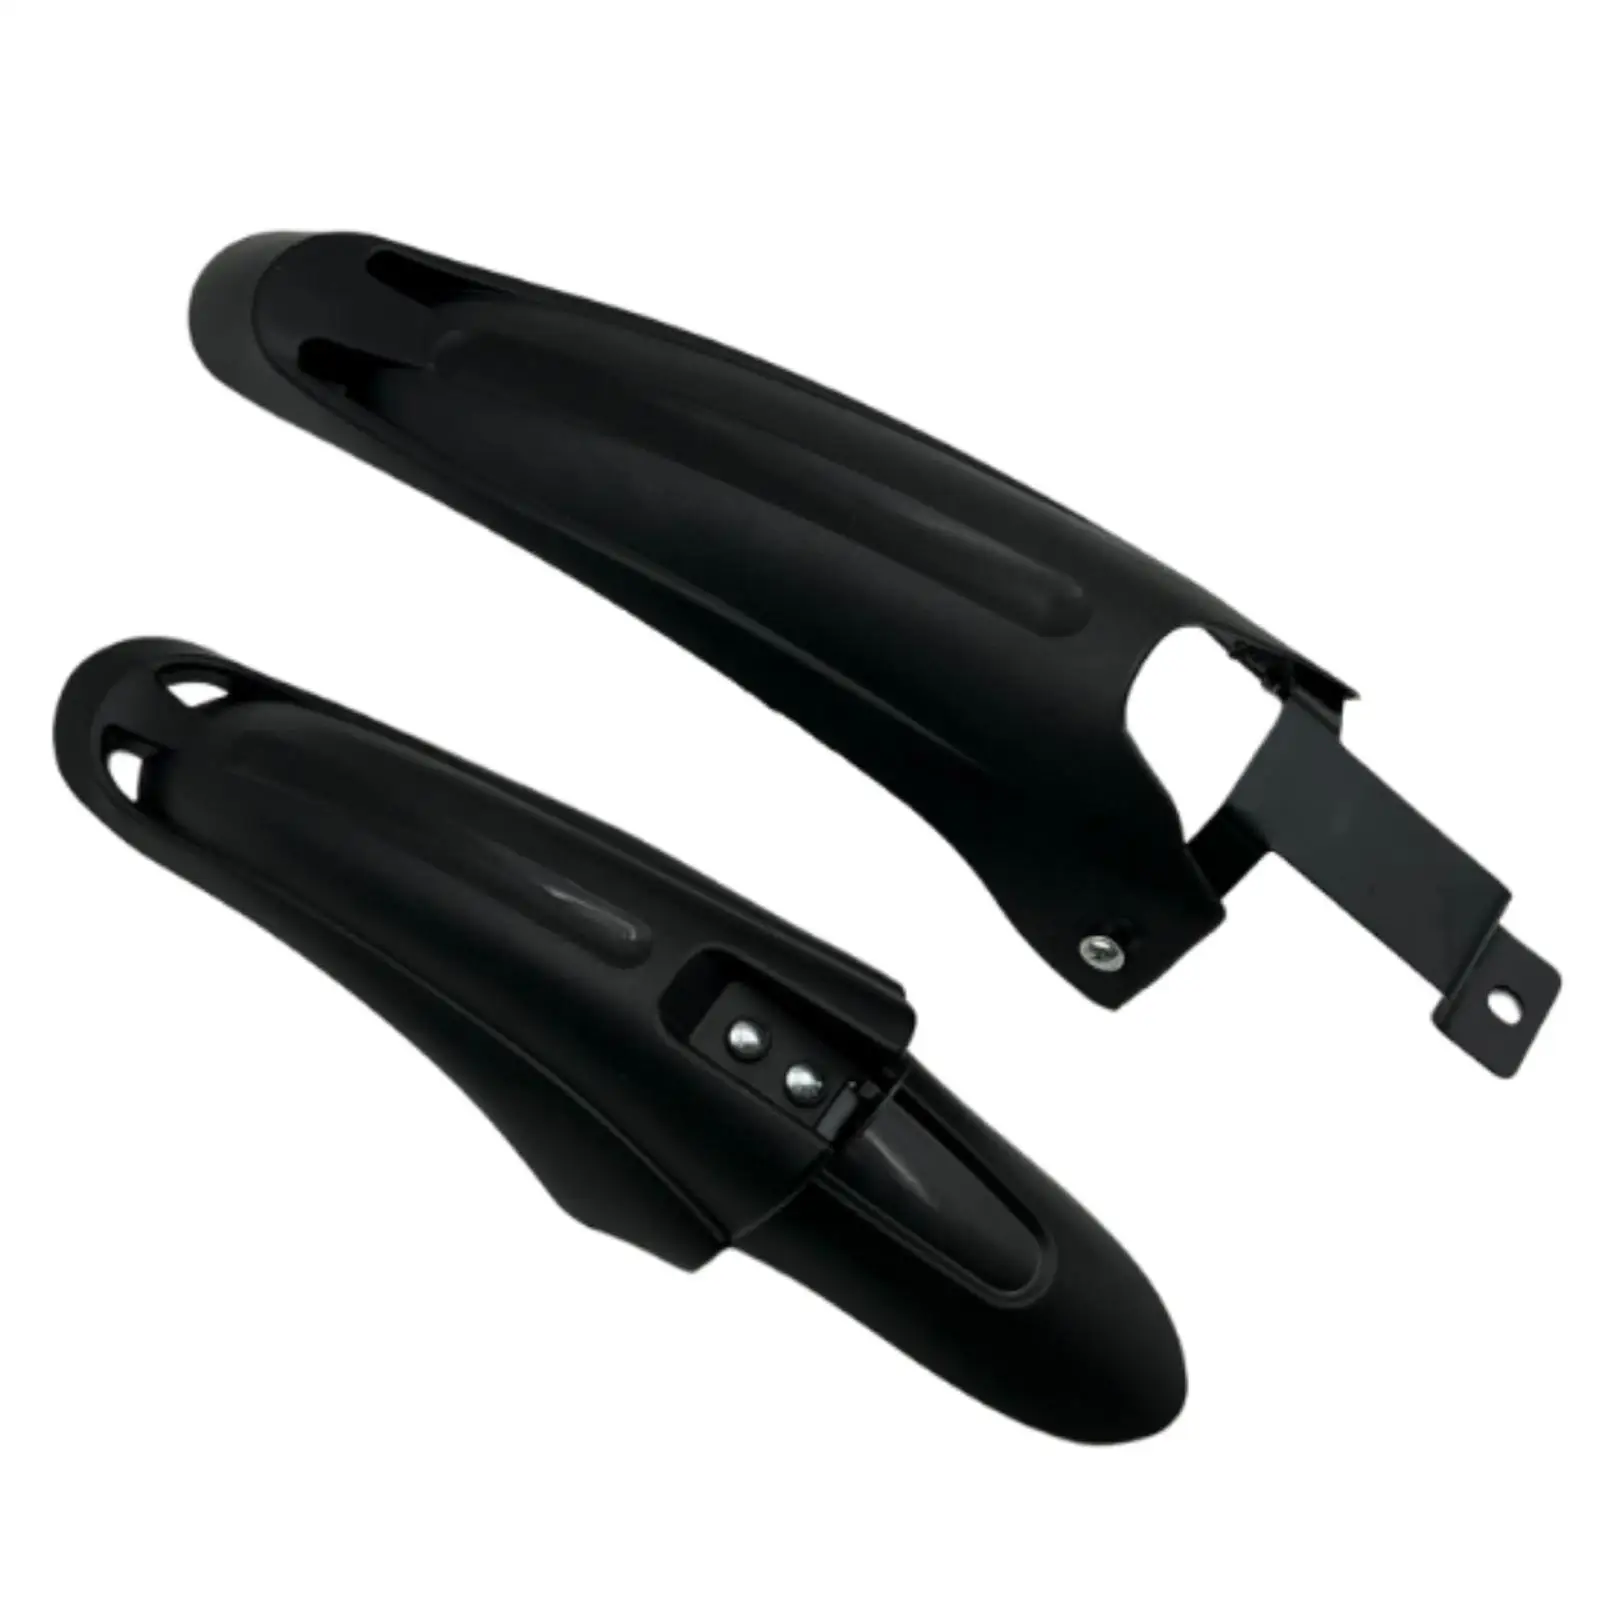 Bike Set Front and Rear Bicycle Tire Mudguard for BMX Road Bikes